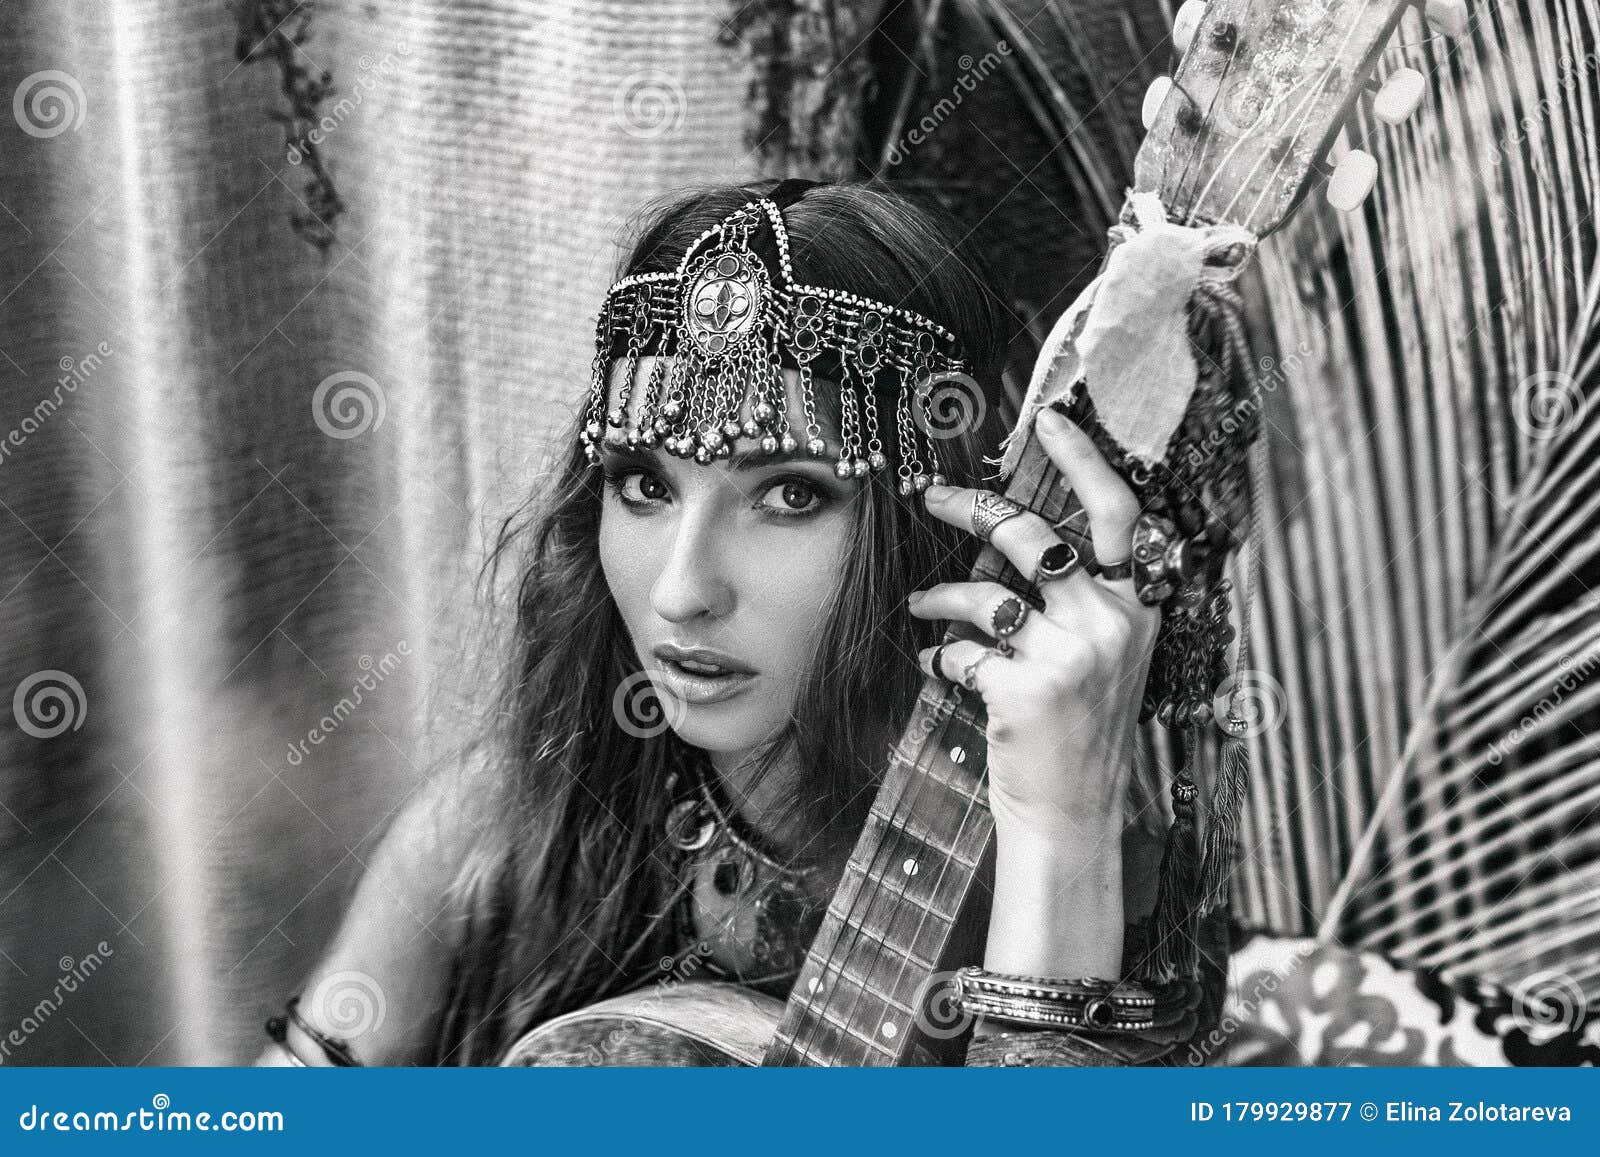 Young Gypsy Woman Fortune Teller Concept With Crystal Ball Royalty-Free ...